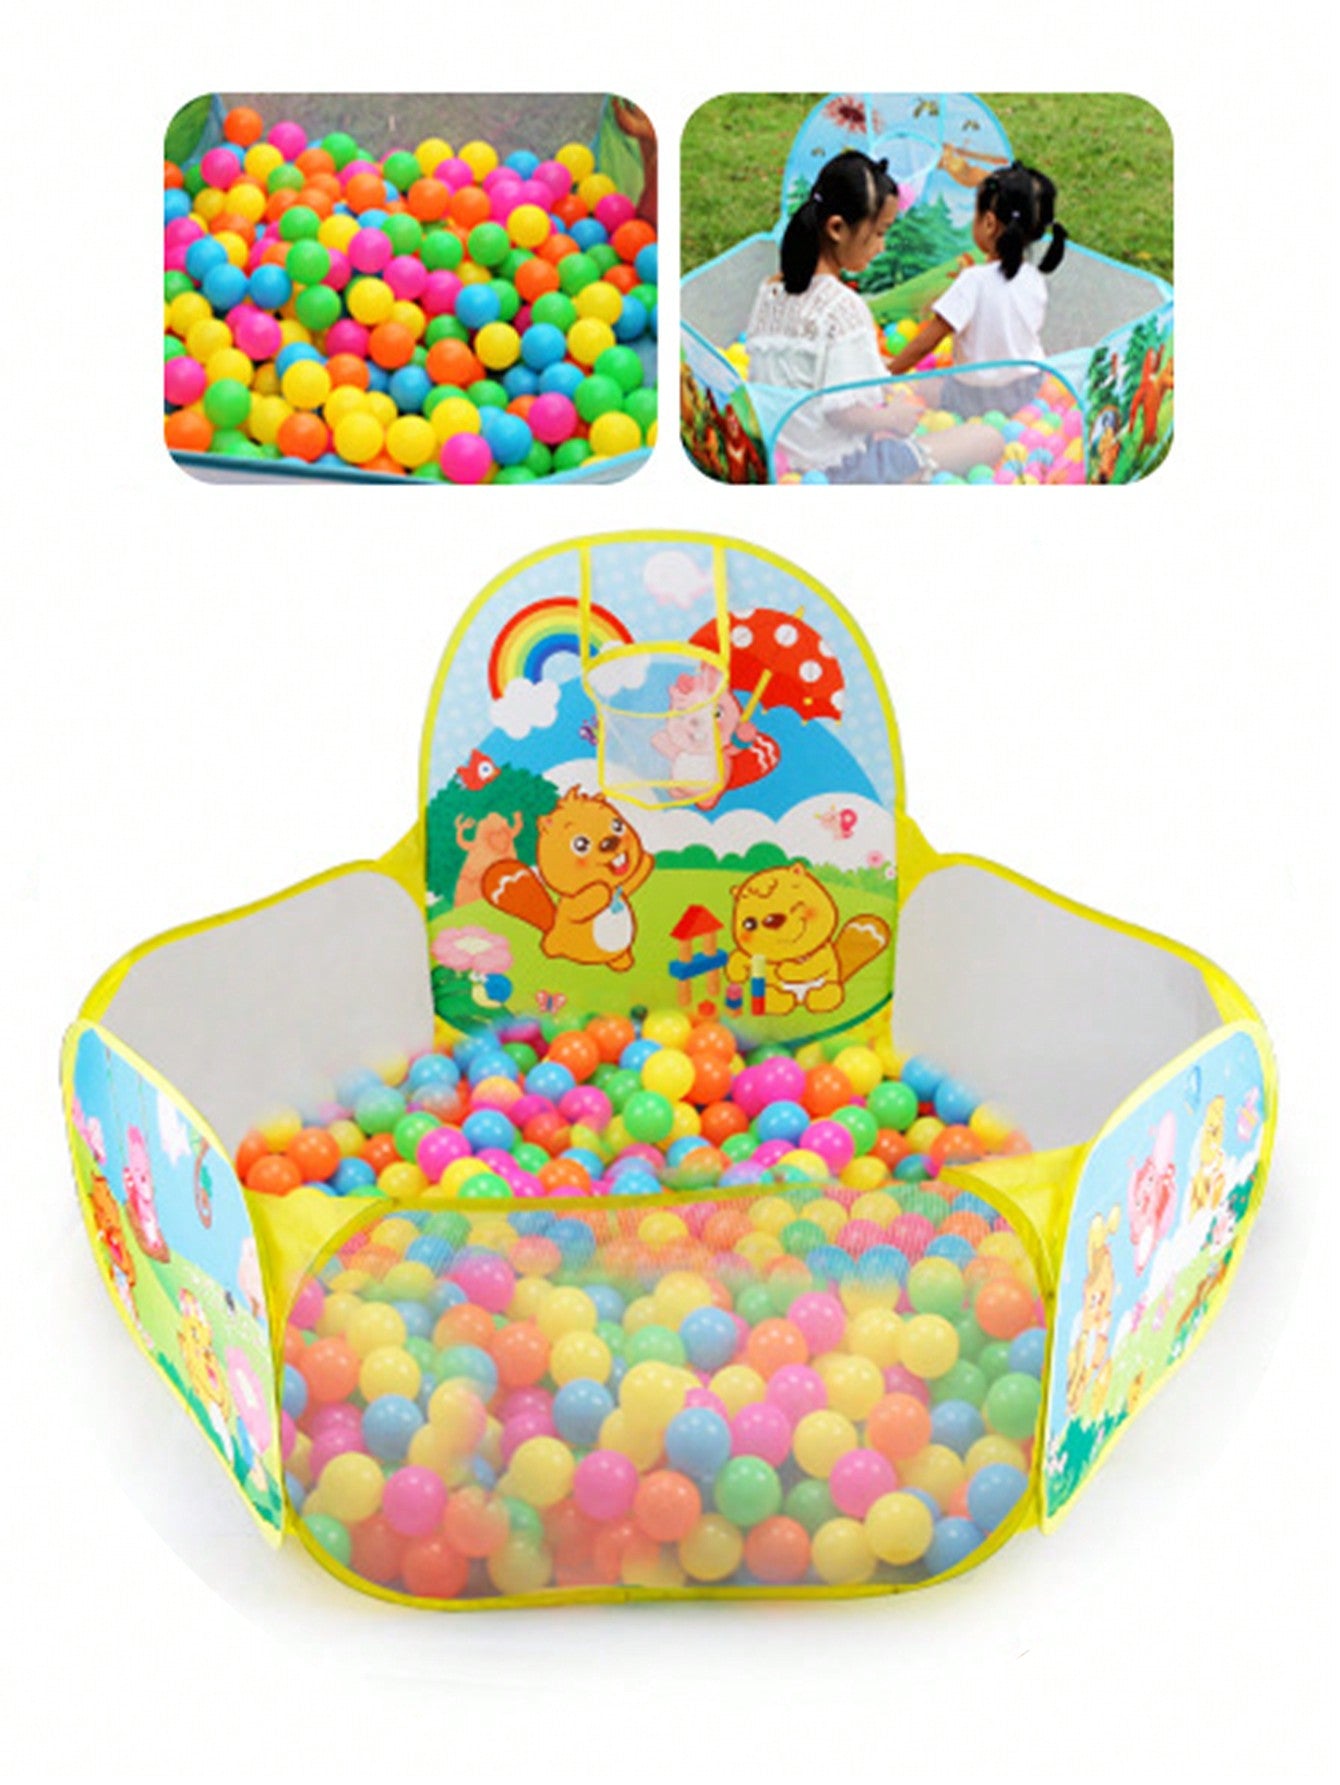 47" Cartoon Ball Pit Kids Toy, Children Ball Pit, Indoor And Outdoor Easy Folding Ball Play Pool Kids Toy Play Tent With Carry Tote, Kids Ball Pit Large Pop Up Childrens Ball Pits Tent For Toddlers Playhouse Baby Crawl Playpen With Basketball Hoop And Zi